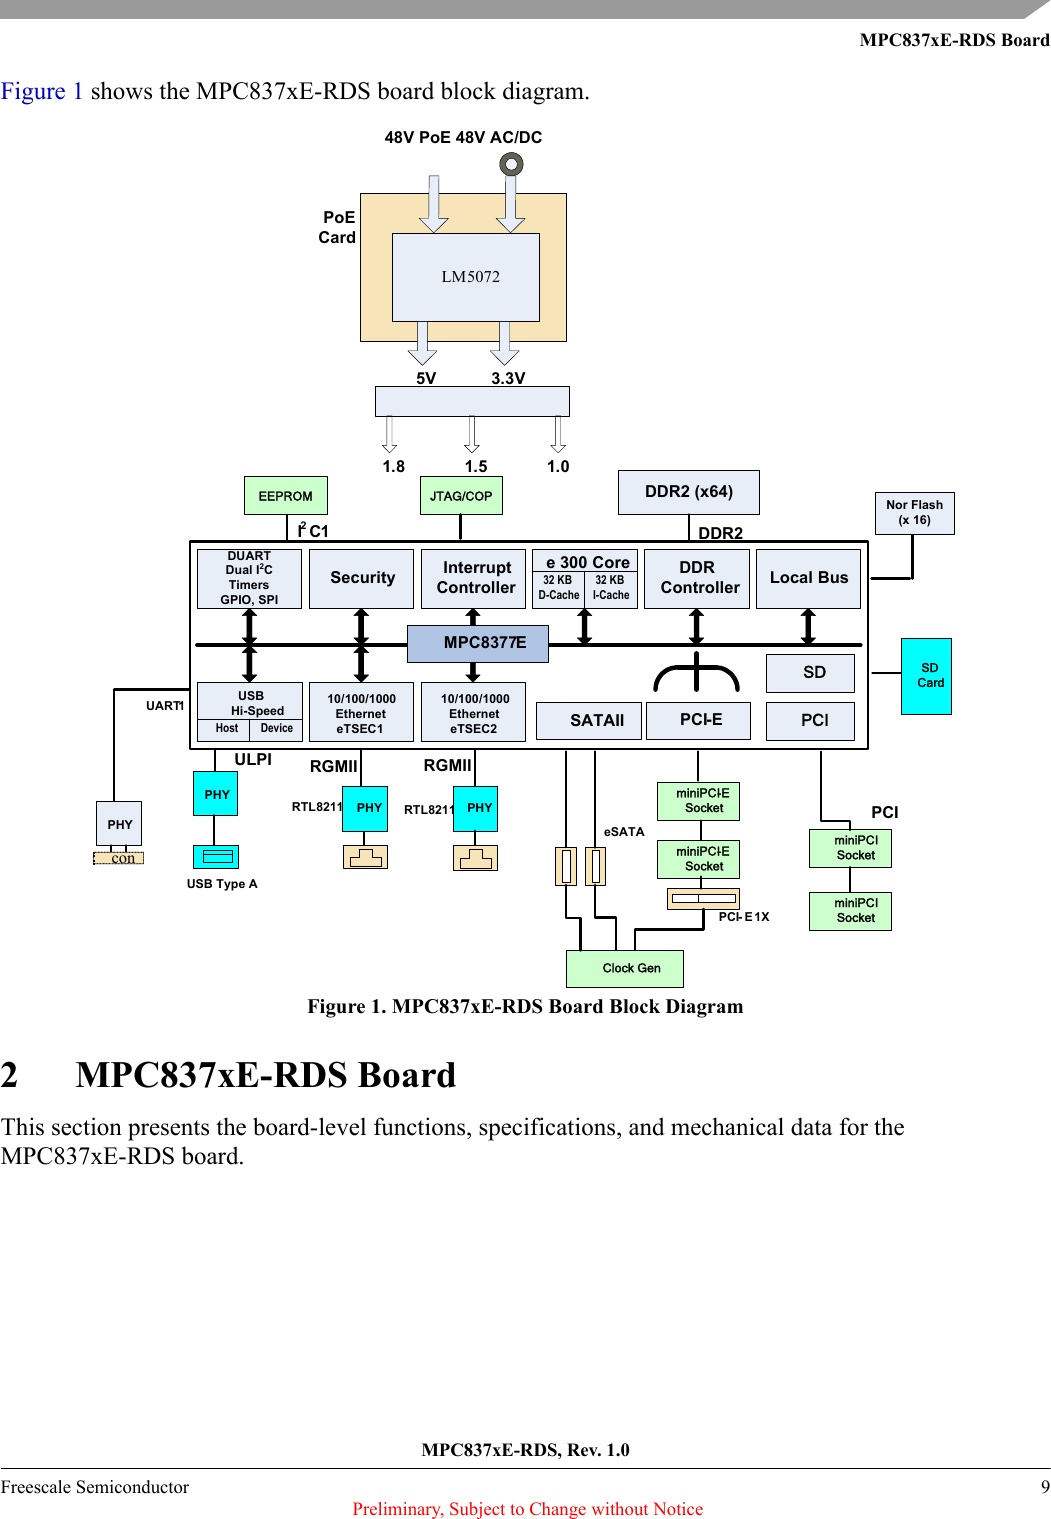 MPC837xE-RDS BoardMPC837xE-RDS, Rev. 1.0Freescale Semiconductor 9 Preliminary, Subject to Change without NoticeFigure 1 shows the MPC837xE-RDS board block diagram.Figure 1. MPC837xE-RDS Board Block Diagram2 MPC837xE-RDS BoardThis section presents the board-level functions, specifications, and mechanical data for the MPC837xE-RDS board.e 300 Core32 KB D-Cache DUARTDual I2CTimersGPIO, SPI  InterruptController  Security      DDRController Local Bus   USBHi-Speed  Host        DevicePHYULPI RGMII RGMIIRTL8211Nor Flash(x 16)PCIDDR2 (x64)I2C1PHYUART1DDR2MPC8377EPCI-ESATAIIeSATAconPCISDminiPCISocketminiPCISocketSDCardClock GenPCI- E 1XJTAG/COPRTL8211 PHY PHYEEPROMminiPCI-ESocketminiPCI-ESocketUSB Type ALM507248V PoE 48V AC/DC1.8 1.5 1.05V 3.3VPoE Card32 KB I-Cache    10/100/1000     EtherneteTSEC1   10/100/1000     EtherneteTSEC2